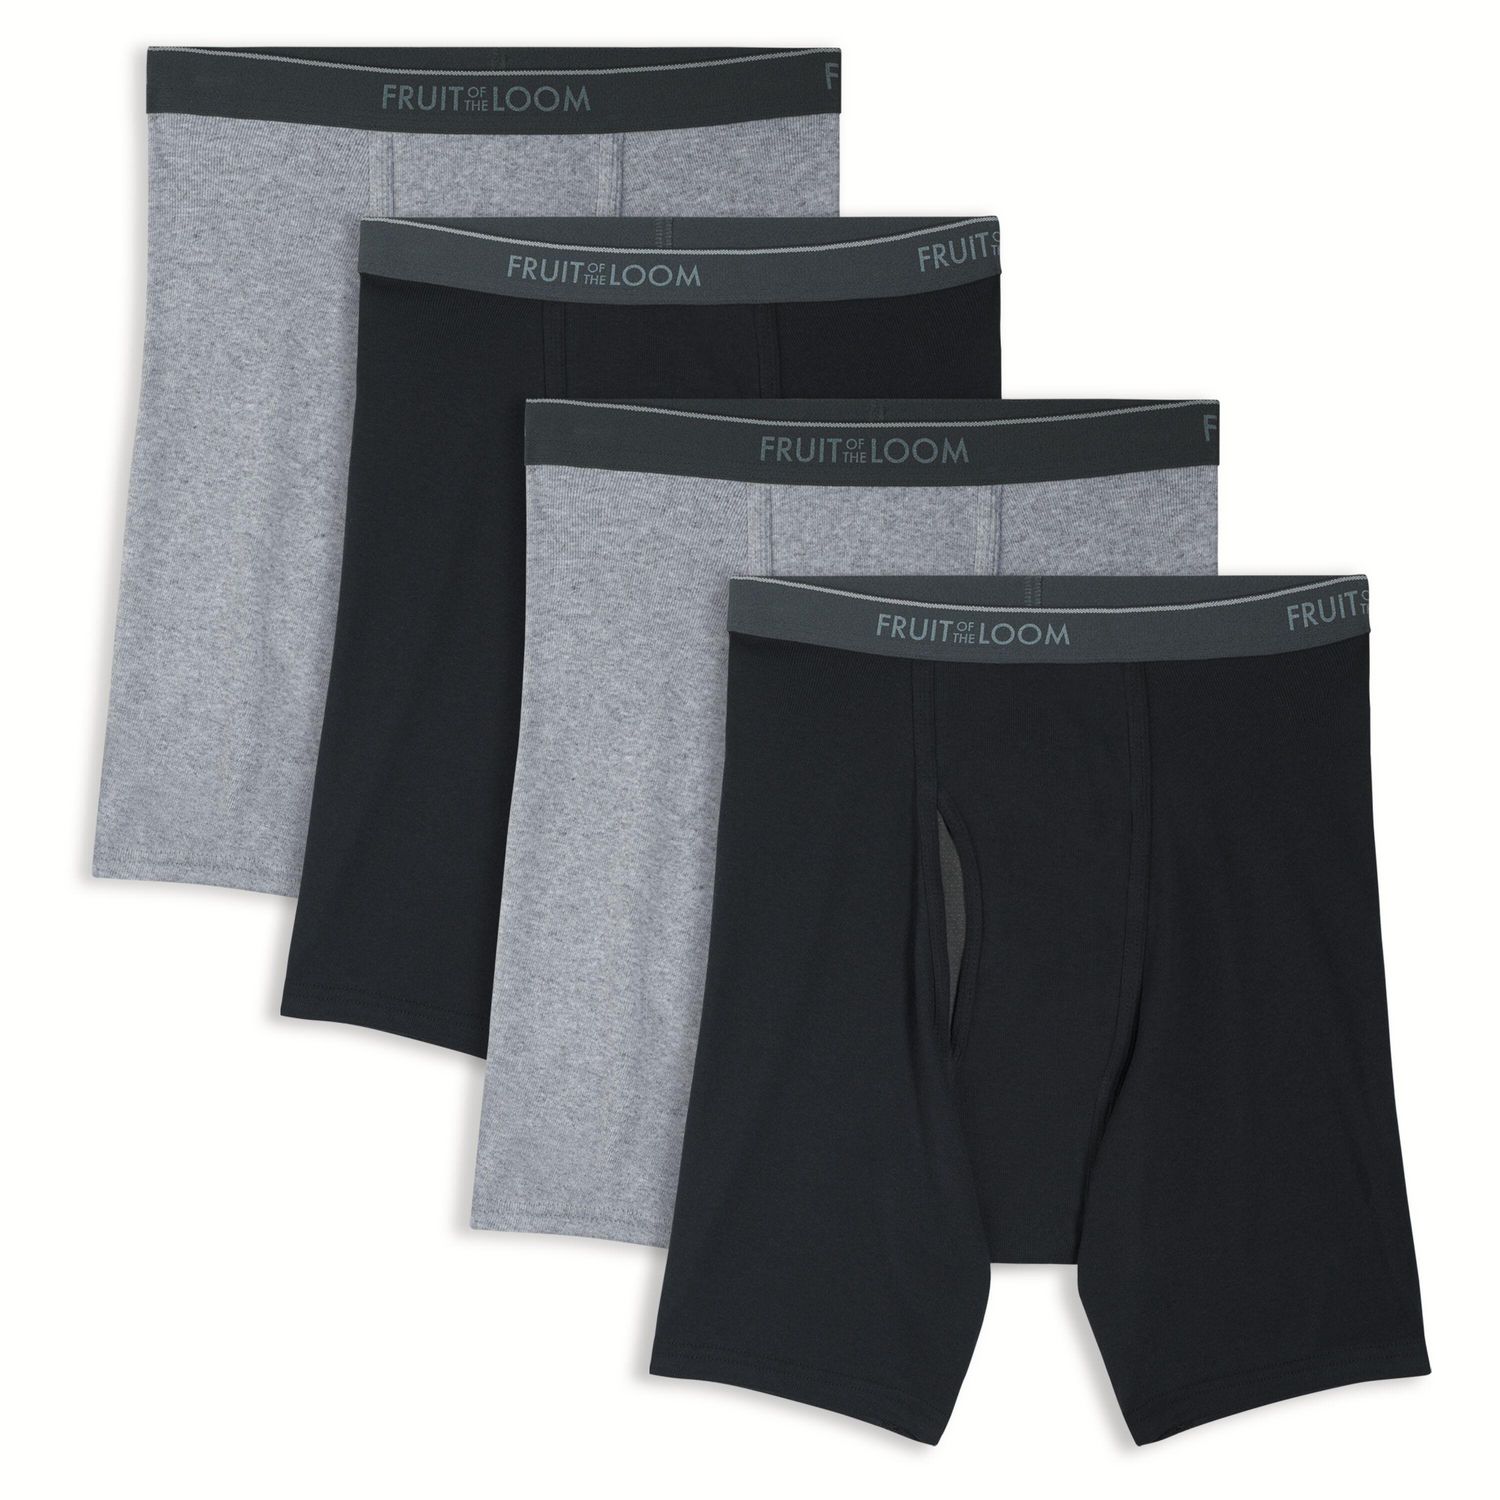 Fruit of the Loom Men's CoolZone Black & Grey Boxer Briefs, 4-Pack